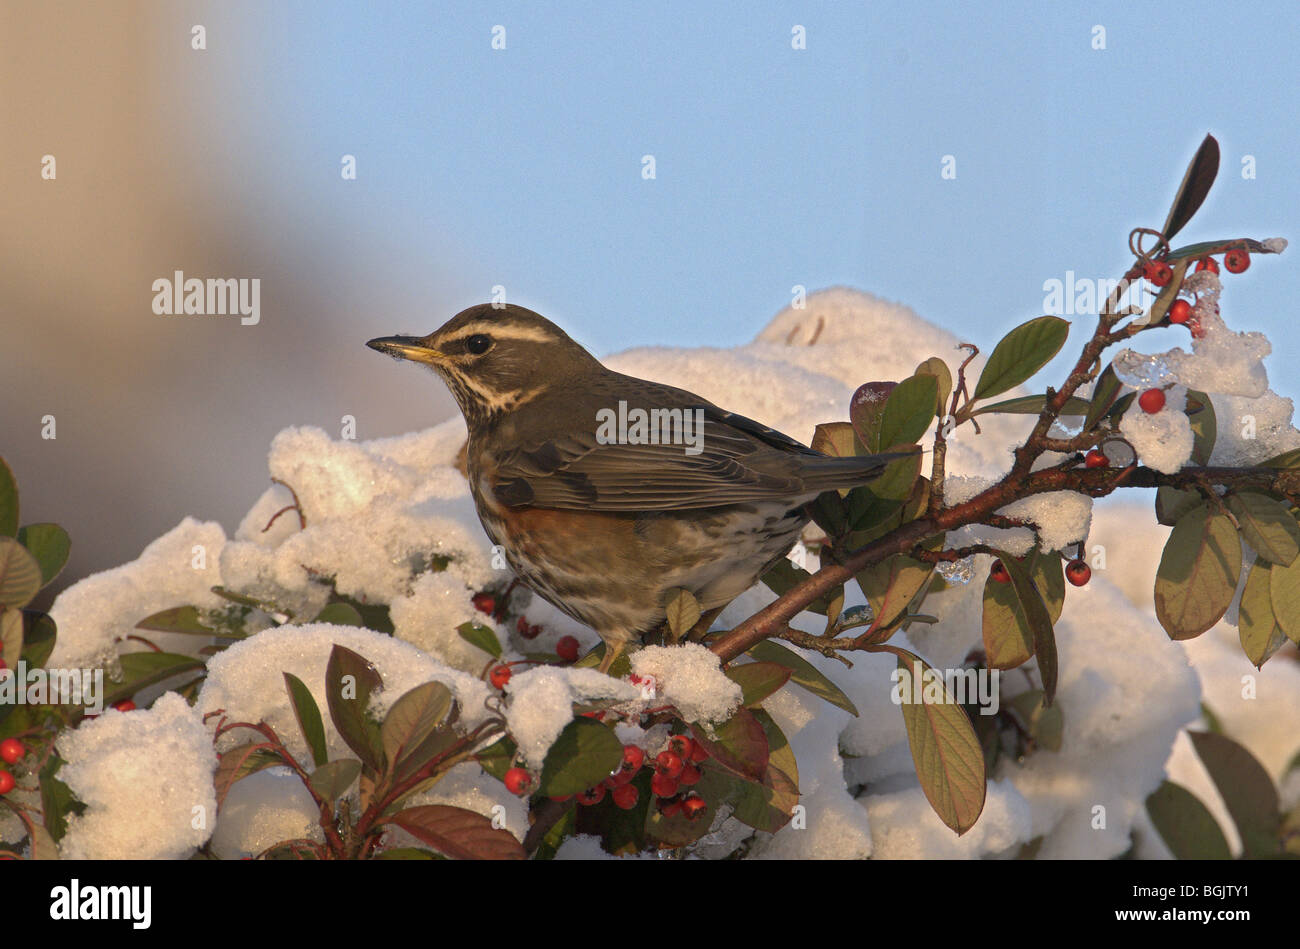 REDWING TURDUS ILIACUS PERCHED ON BRANCH FEEDING ON WINTER BERRIES IN SNOW Stock Photo